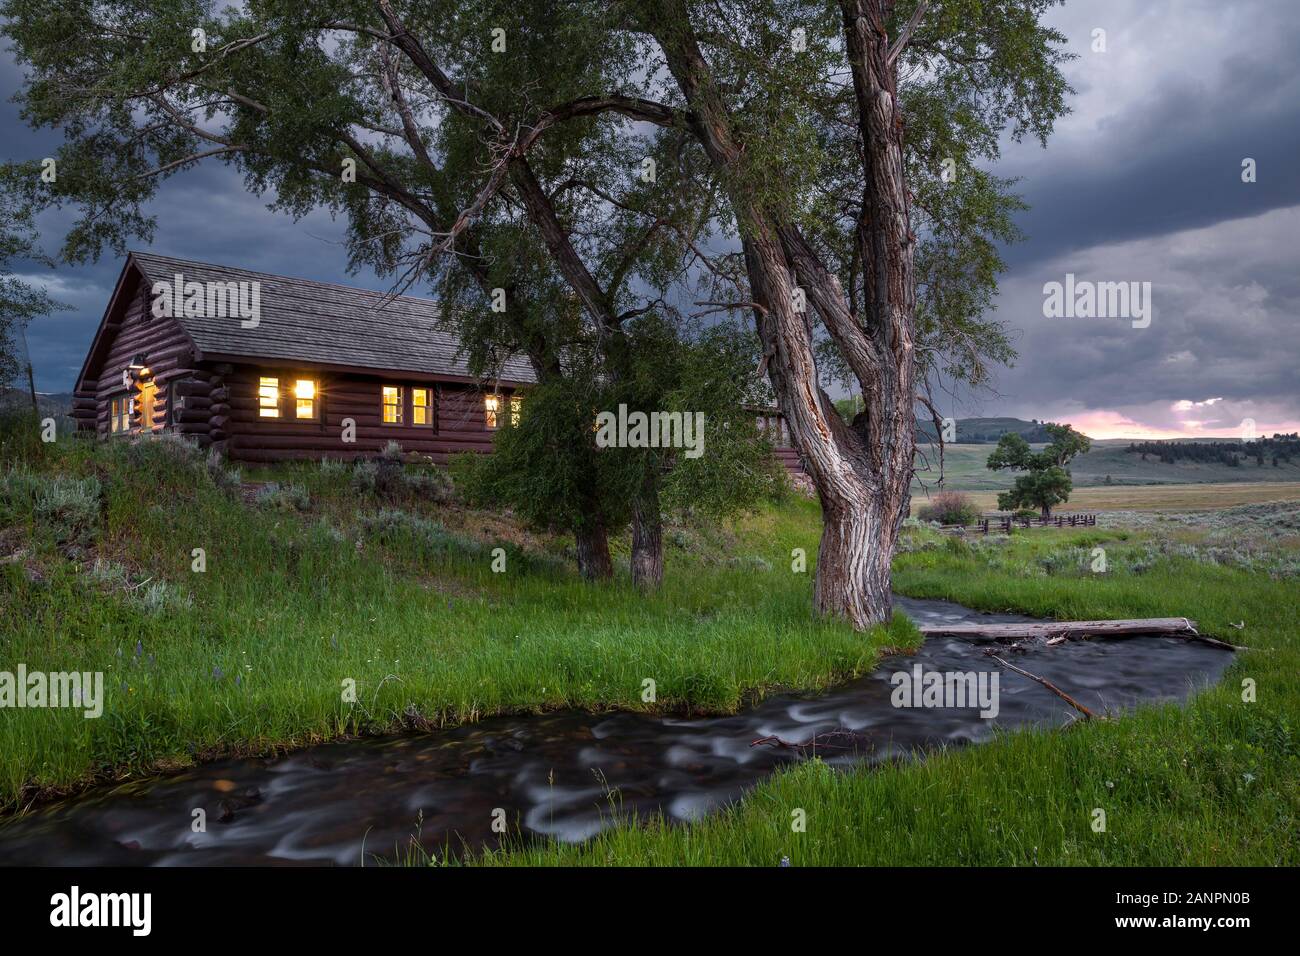 WY02722-00...WYOMING - The Bunkhouse at the Lamar Buffalo Ranch in the Lamar Valley of Yellowstone National Park. Stock Photo